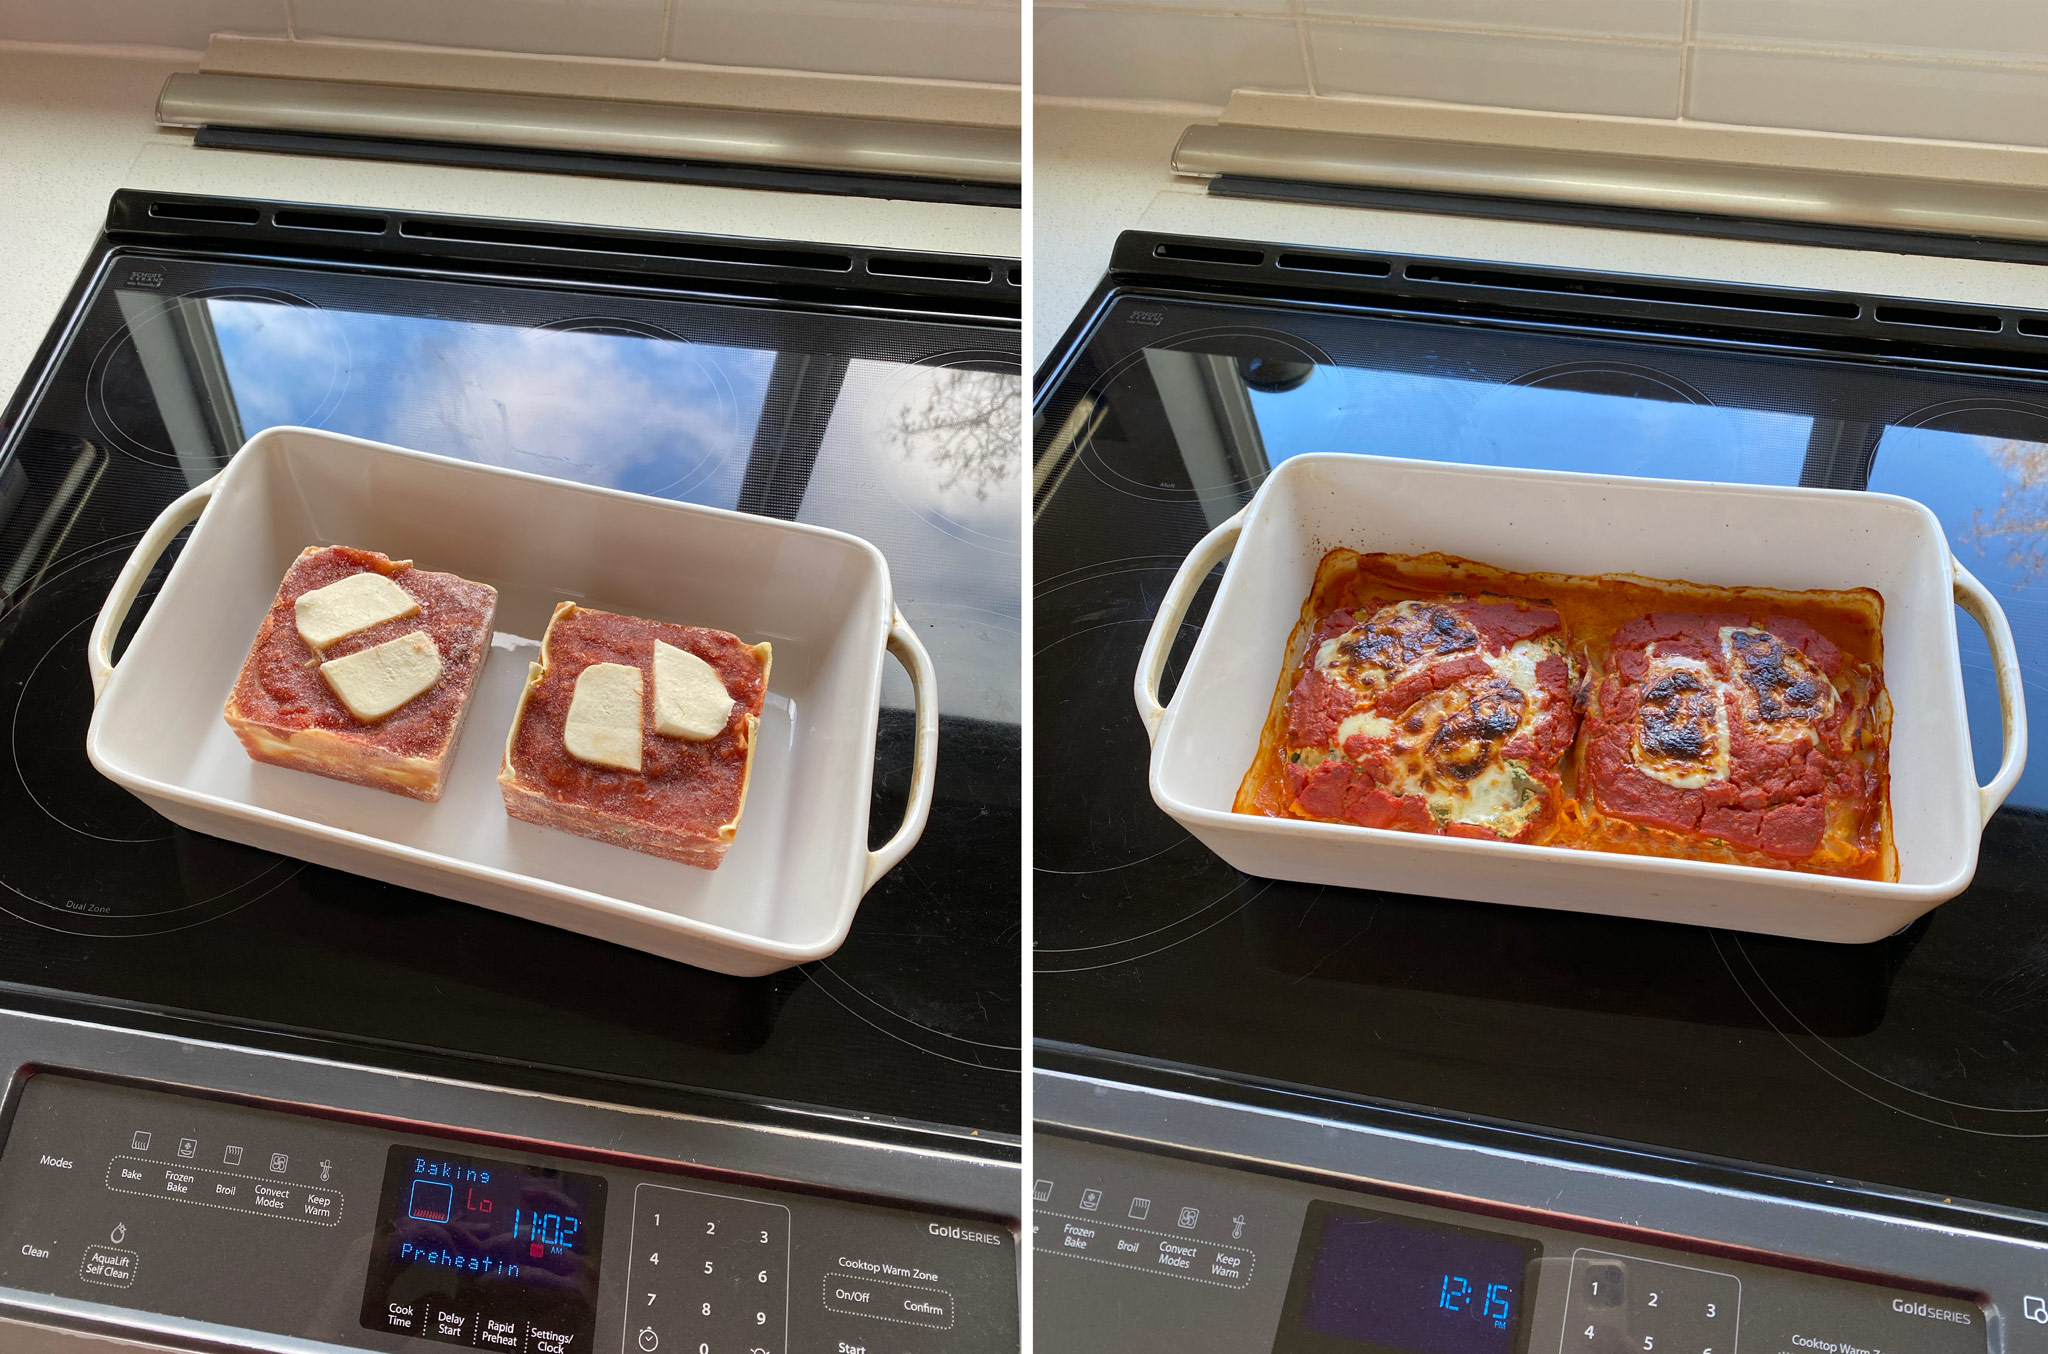 lasagna reheated in the oven before and after.